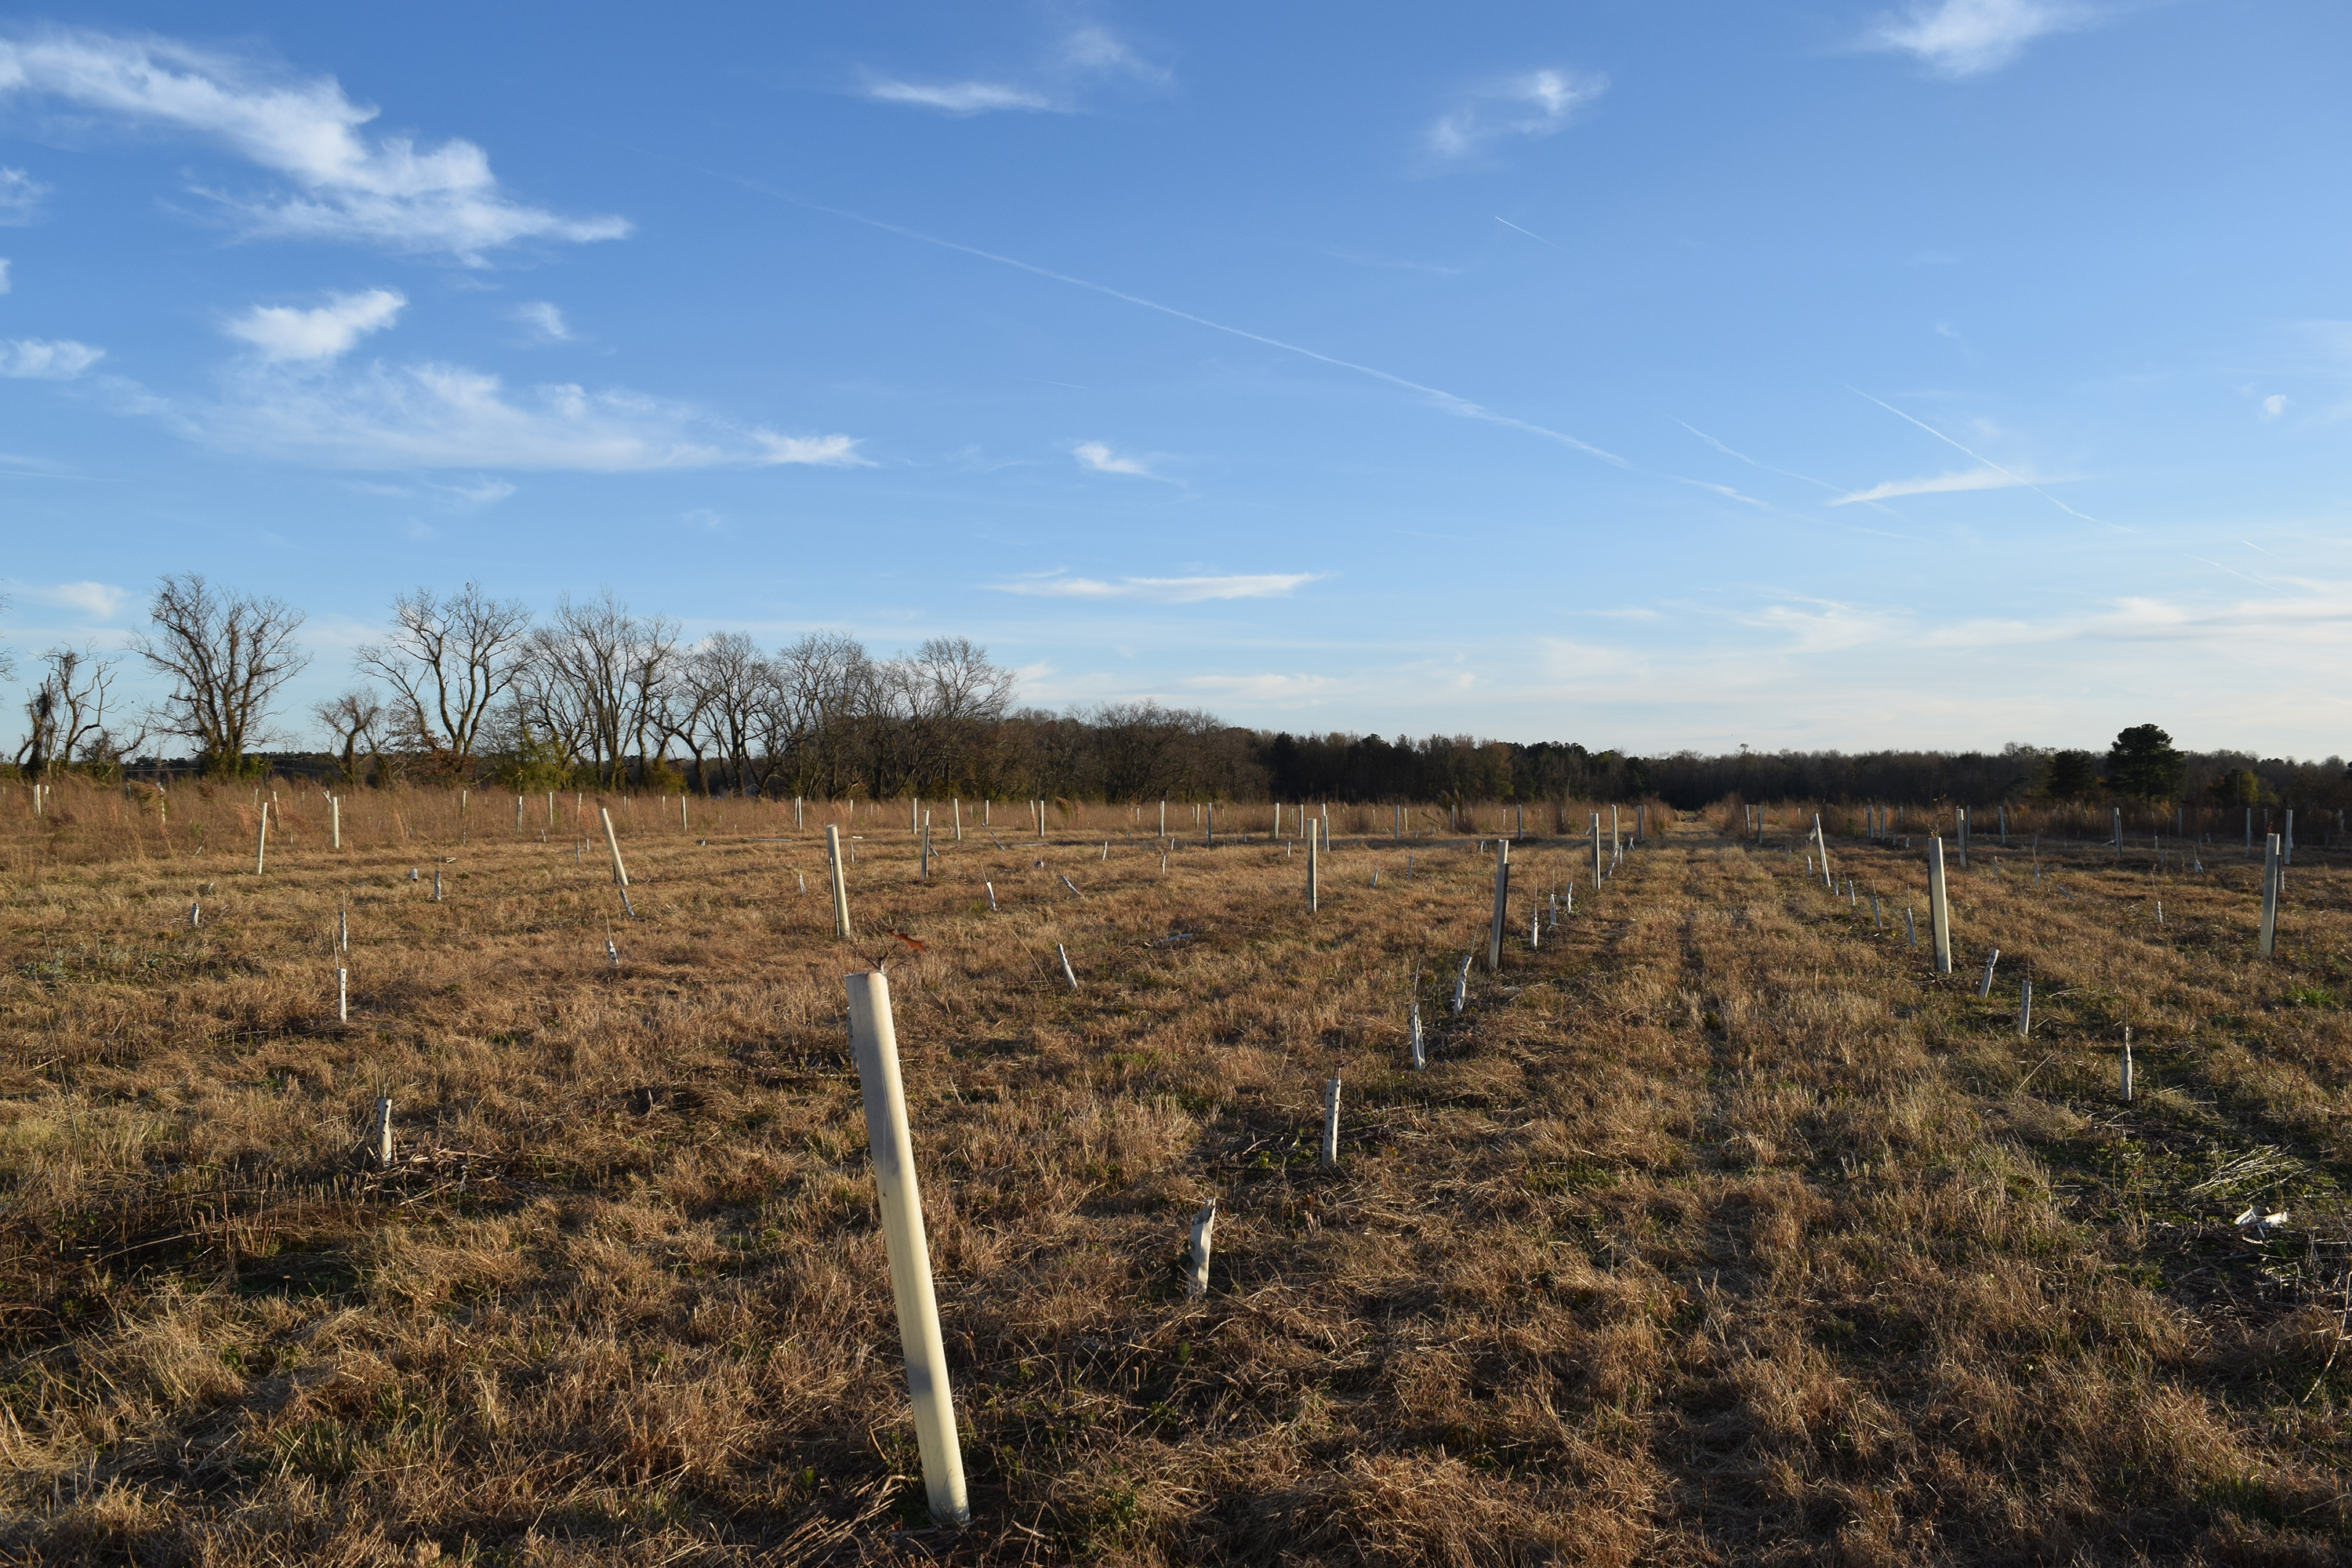 Rows of tall white plastic tubes fill an open field. Shorter cardboard tree shelters fill in the rows between the tubes.